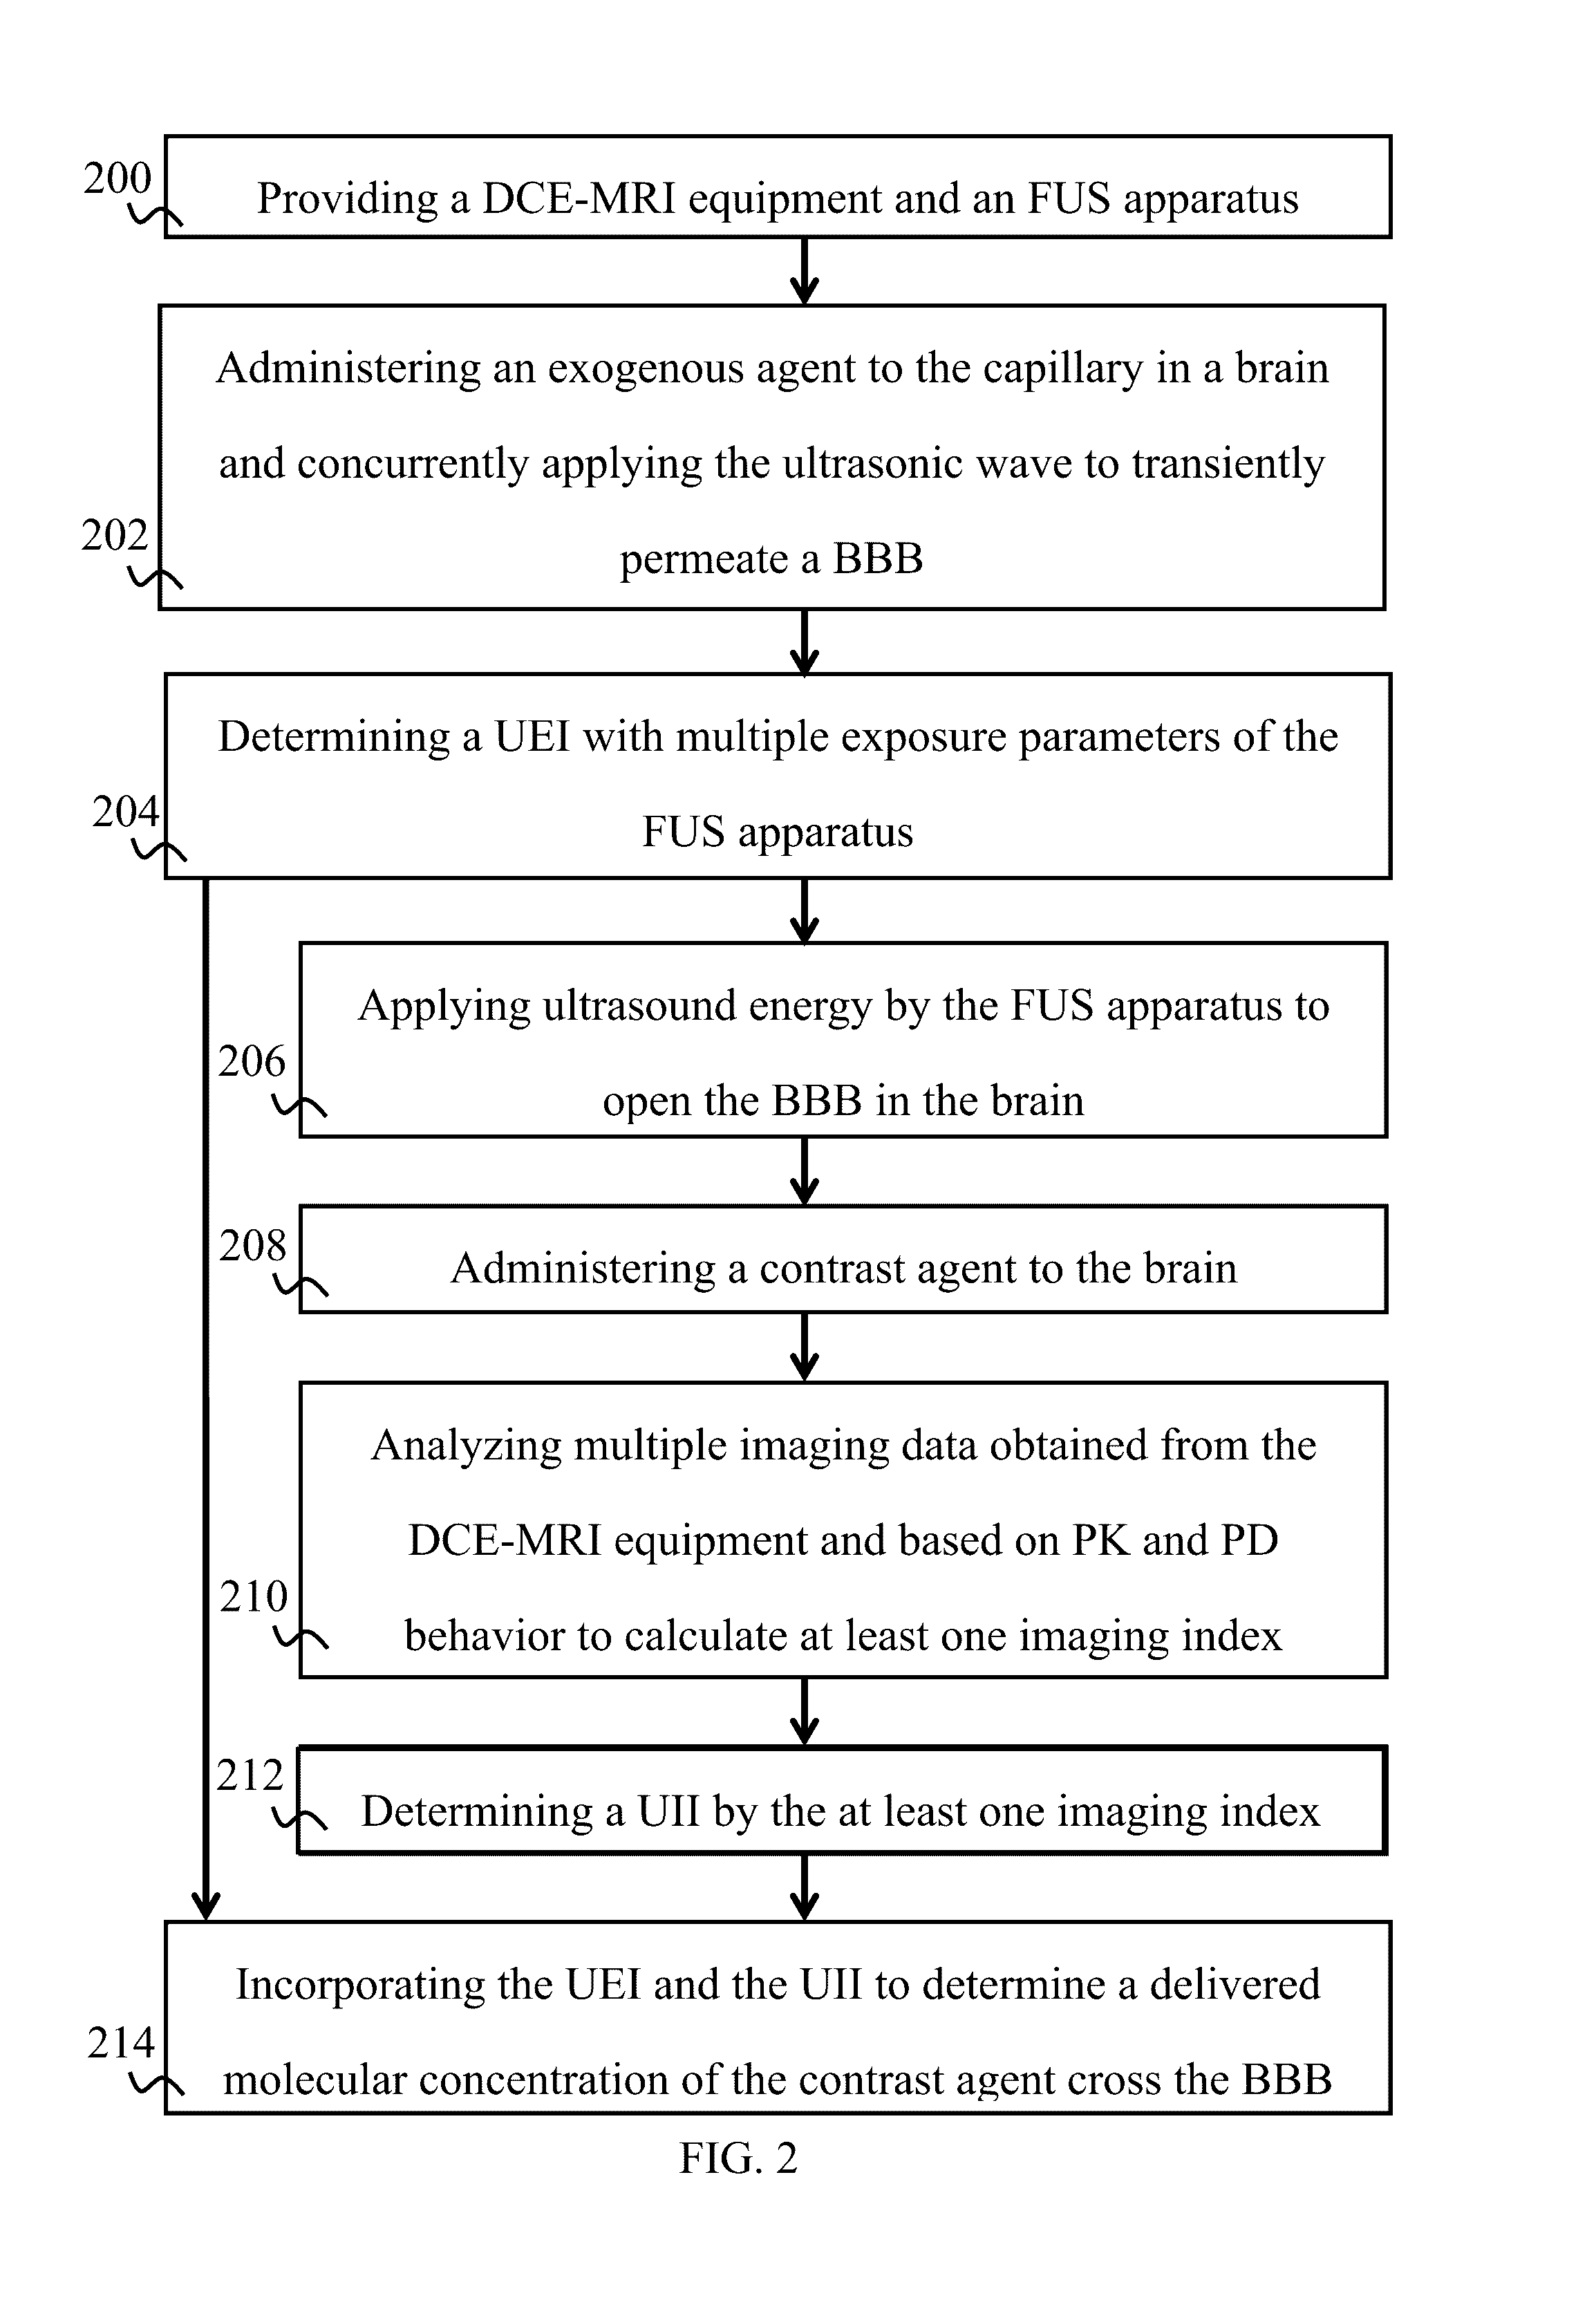 Method for ultrasound-mediated delivery system to monitor molecular penetration